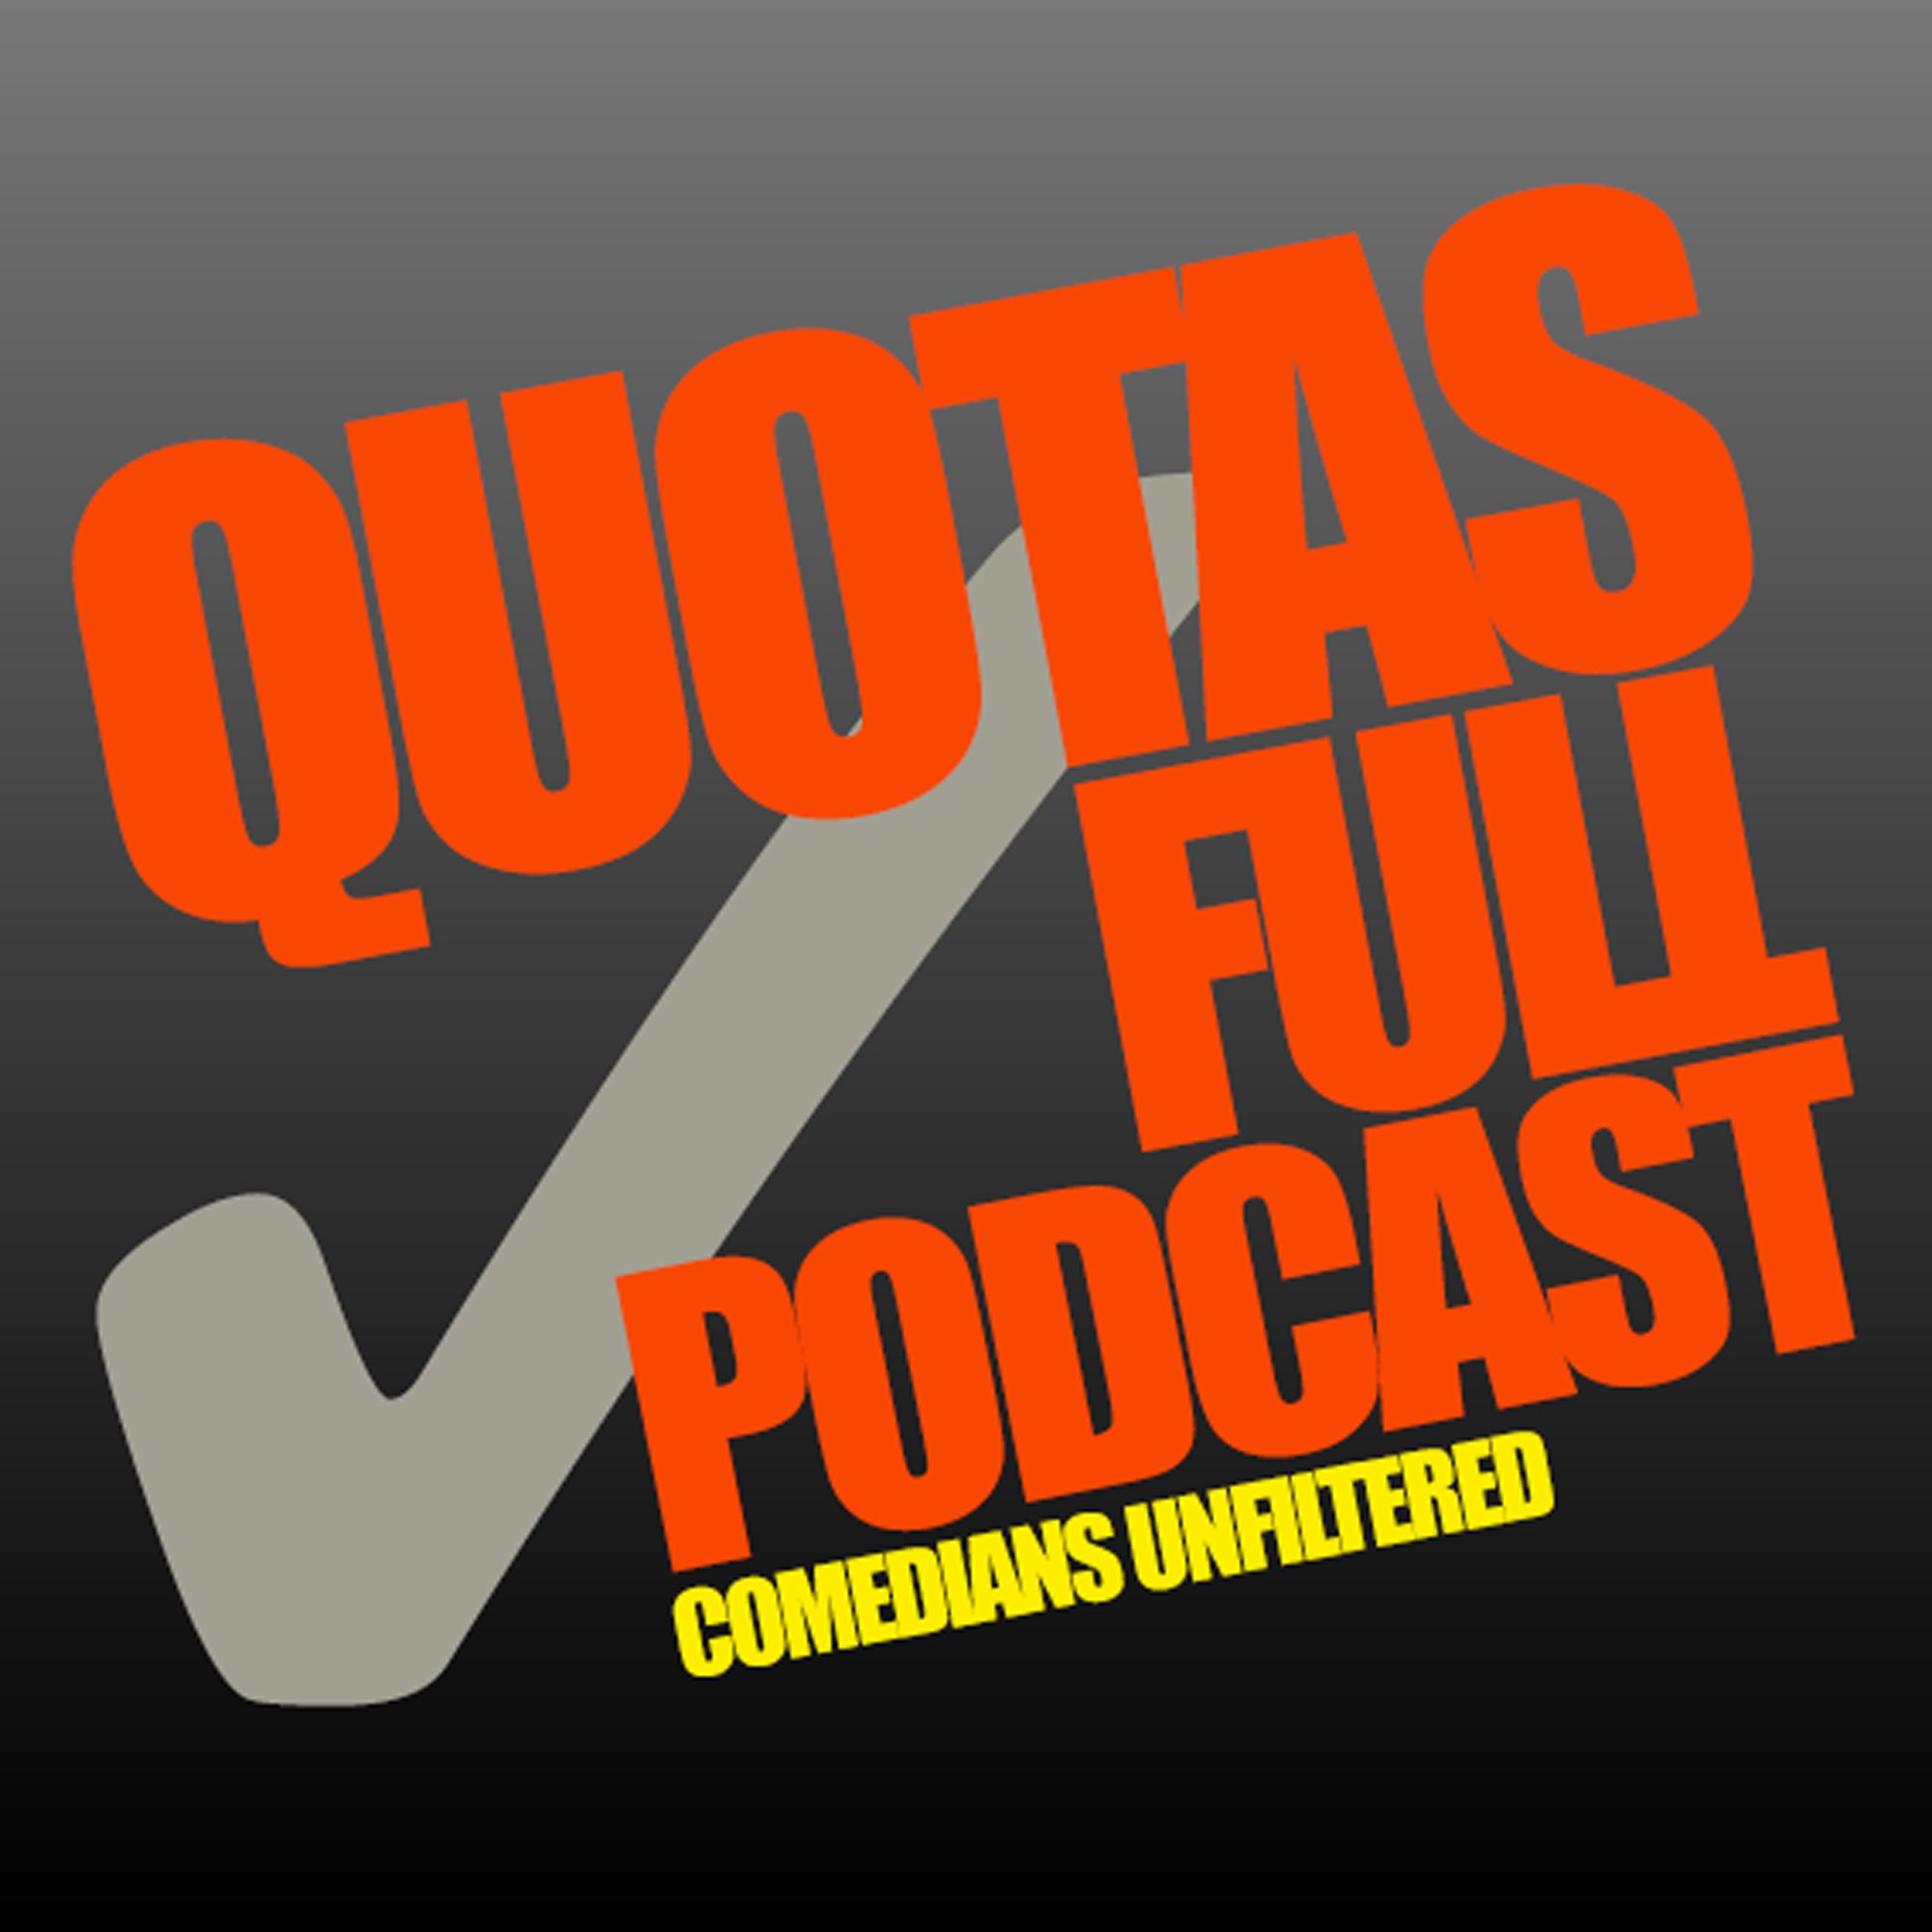 Quotas Full Podcast - Where Comedians are Unfiltered. Available on @Spotify @YouTube and @ApplePodcasts